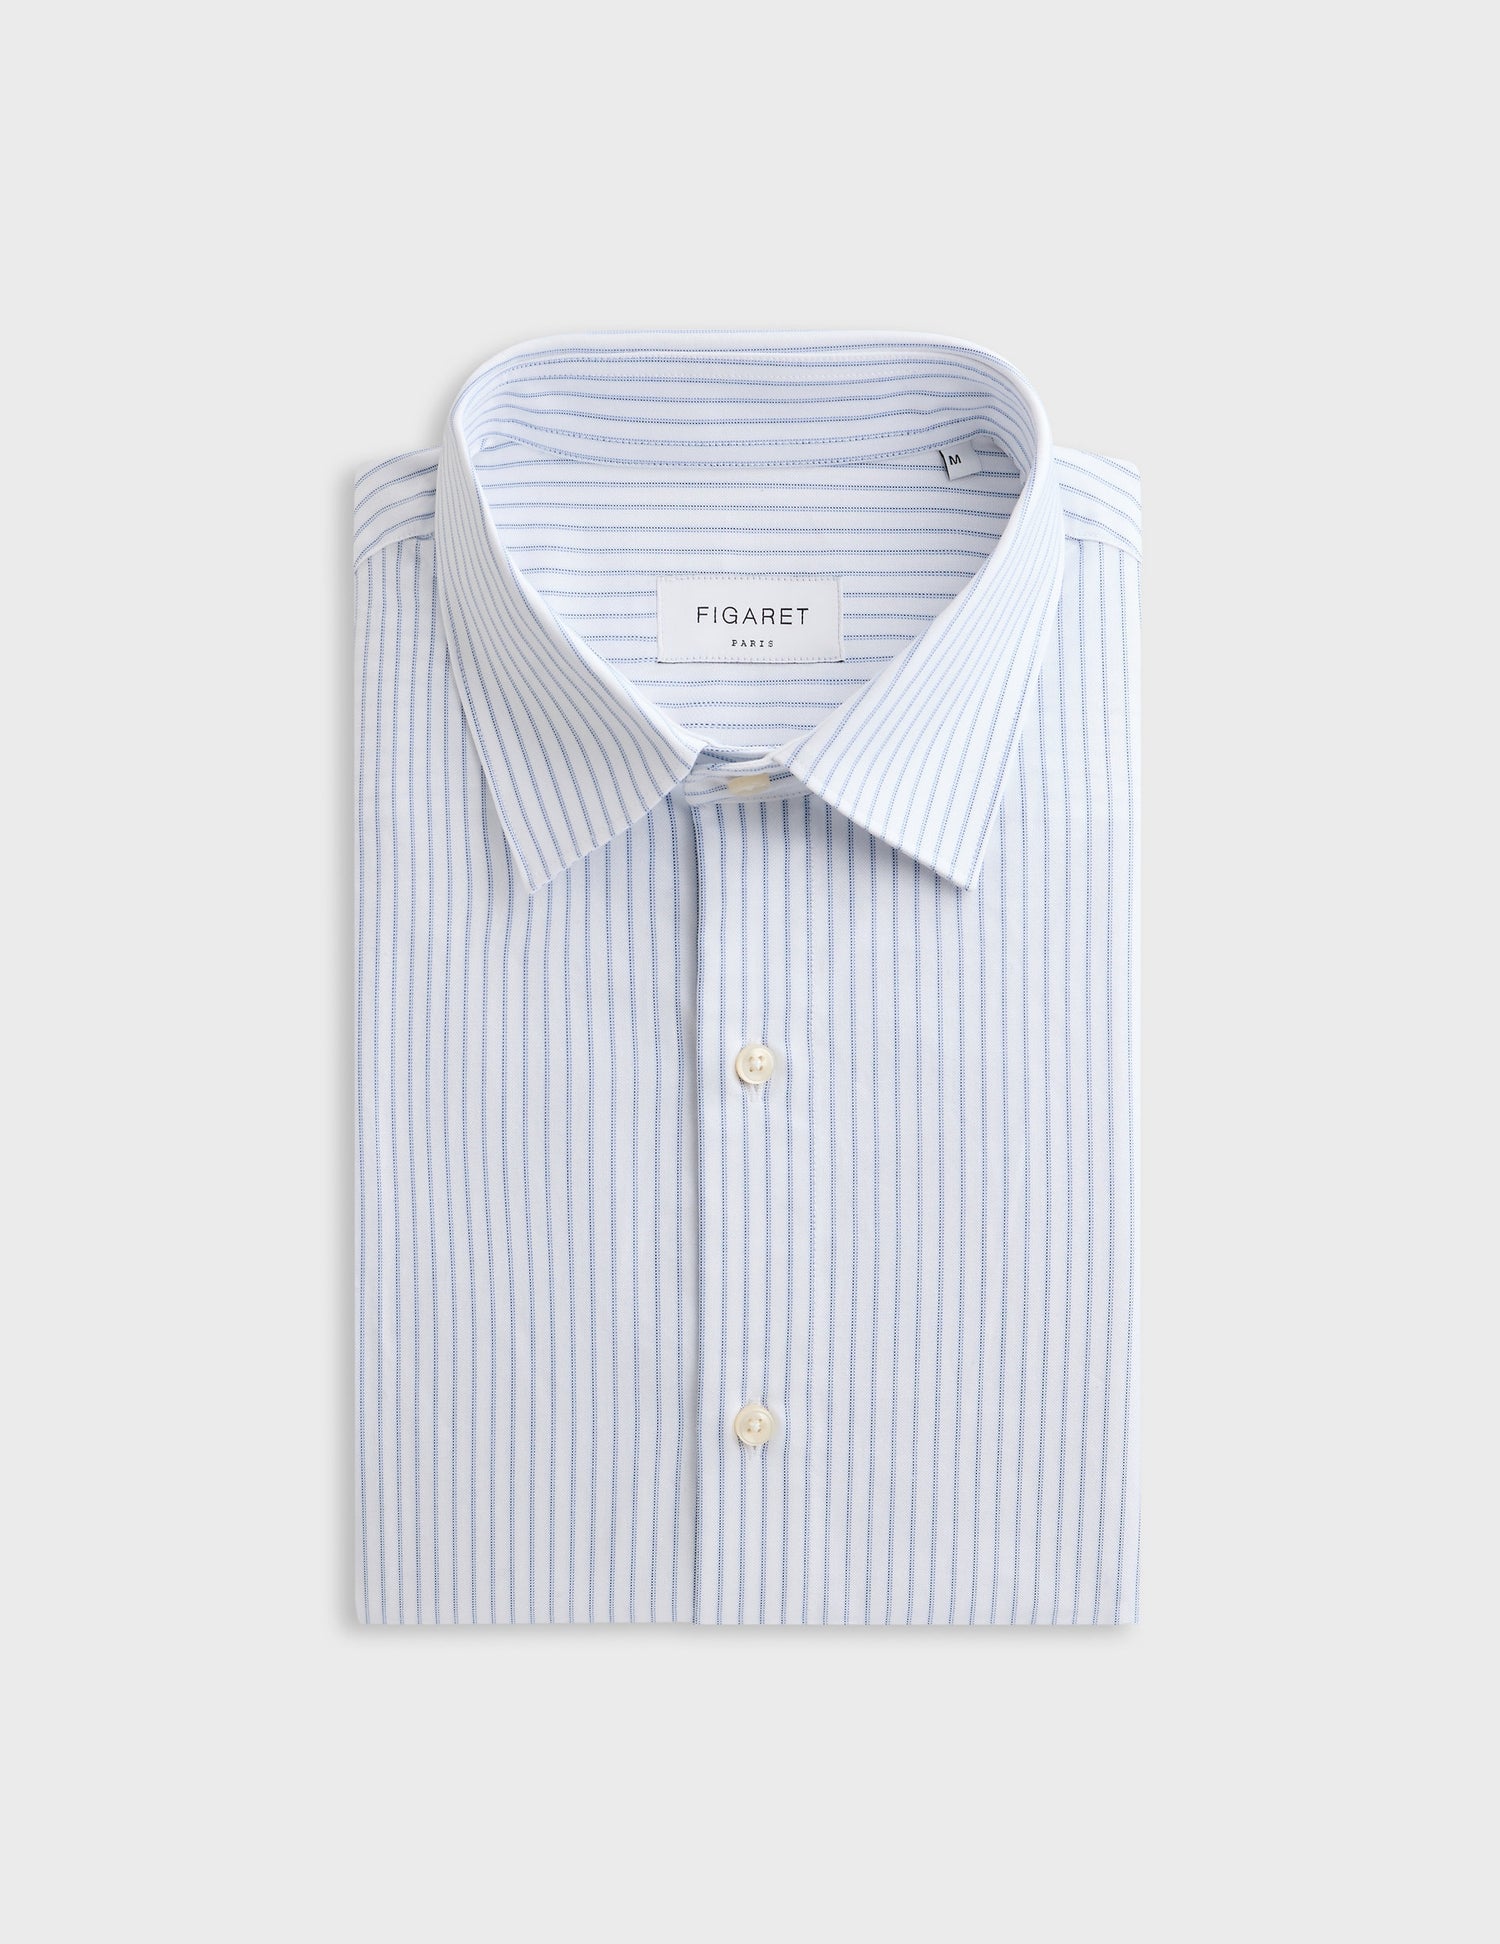 Blue striped Auguste shirt - Oxford - French Collar#4